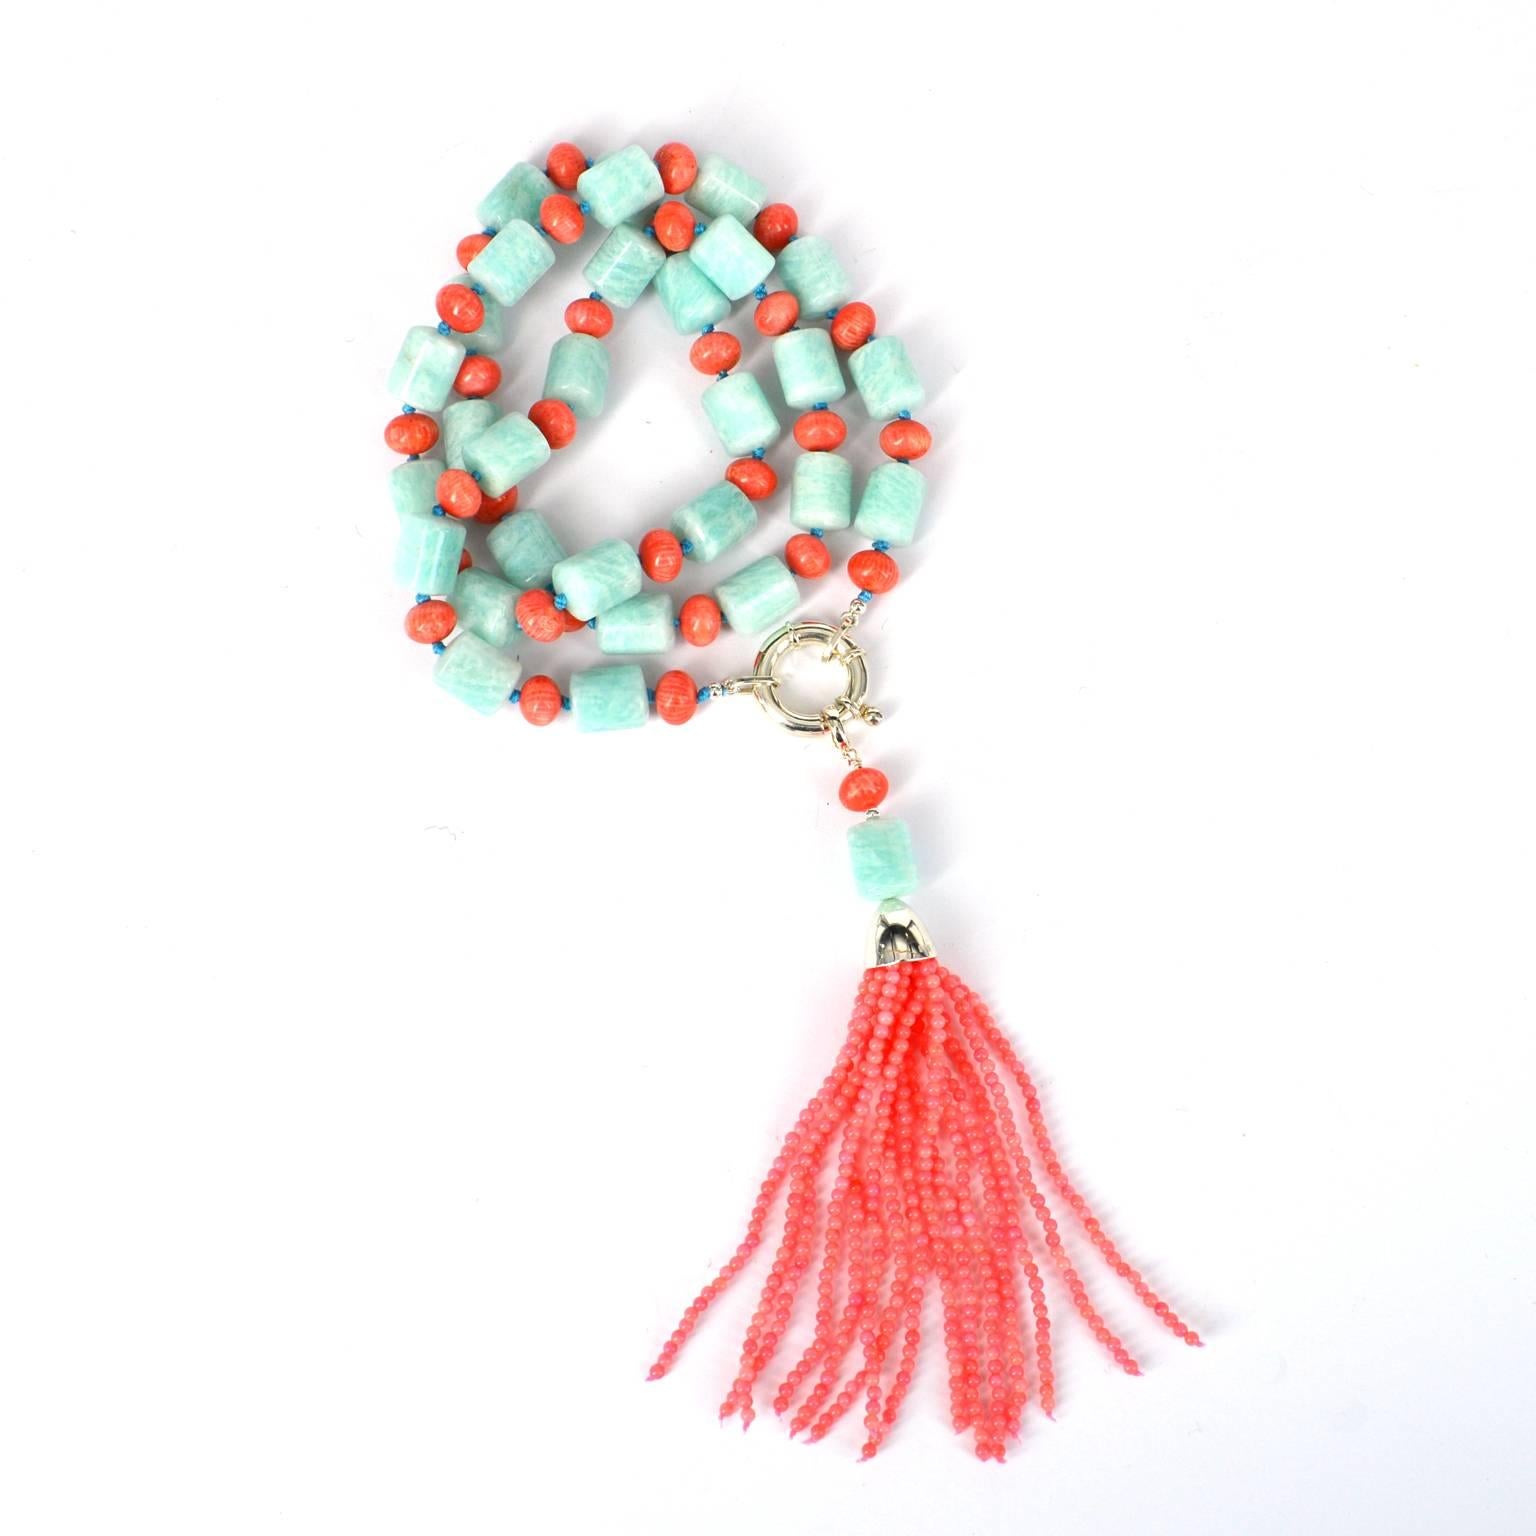 Gorgeous pastels of 13mm Amazonite tubes and 7mm dyed bamboo coral roundels, 2mm coral beads create the  removable tassel. The necklace is finished with a large Sterling Silver bolt clasp.
72cm Necklace with a detachable tassel pendant 12cm long.